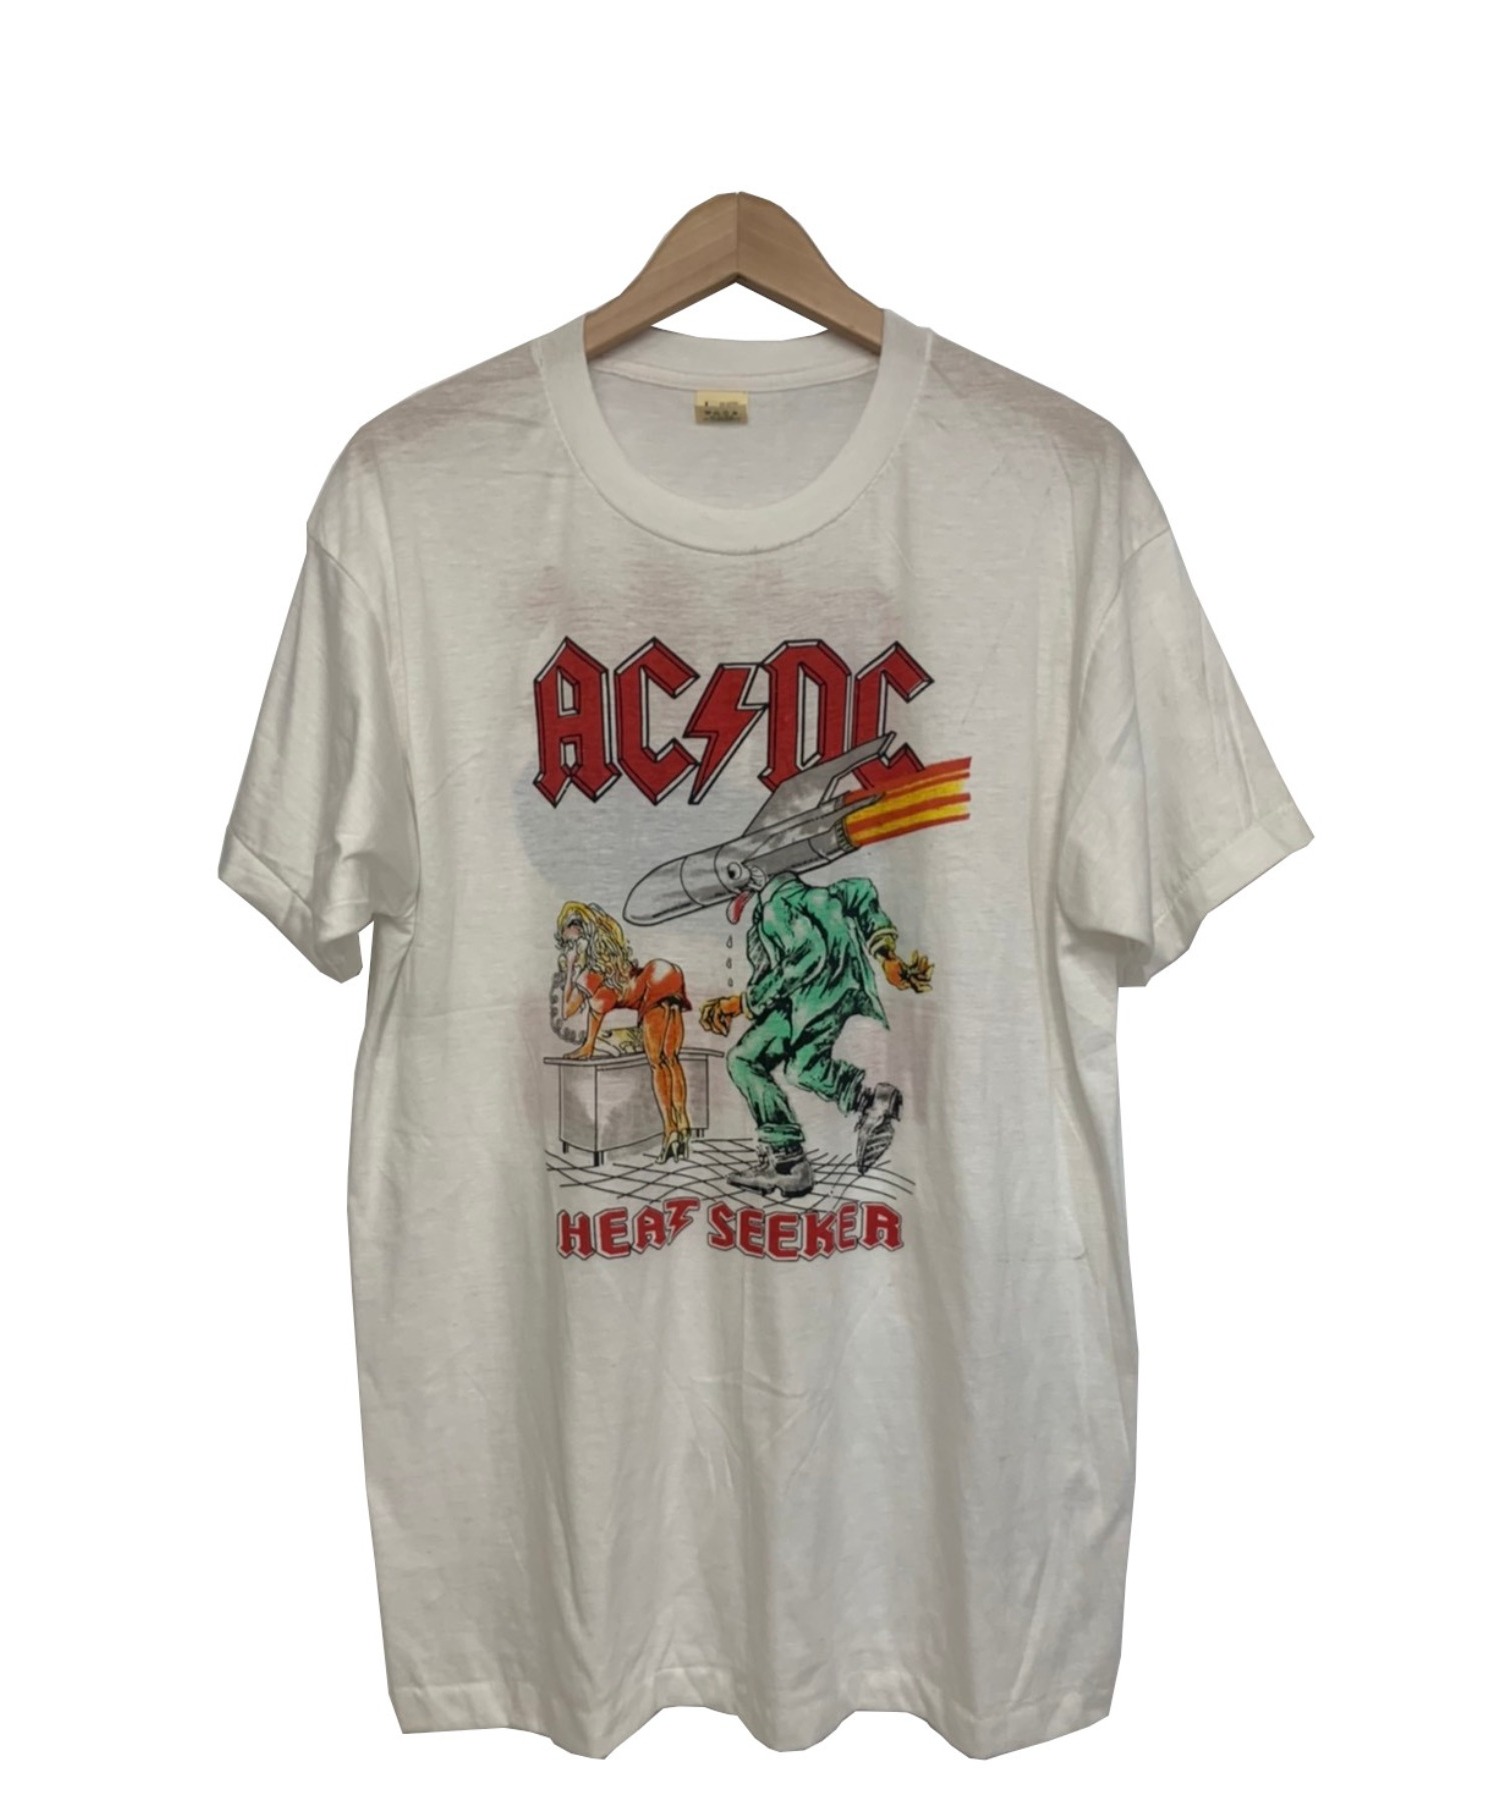 ACDC 1982年バンドTshirt Made in U.S.A 古着 - Tシャツ